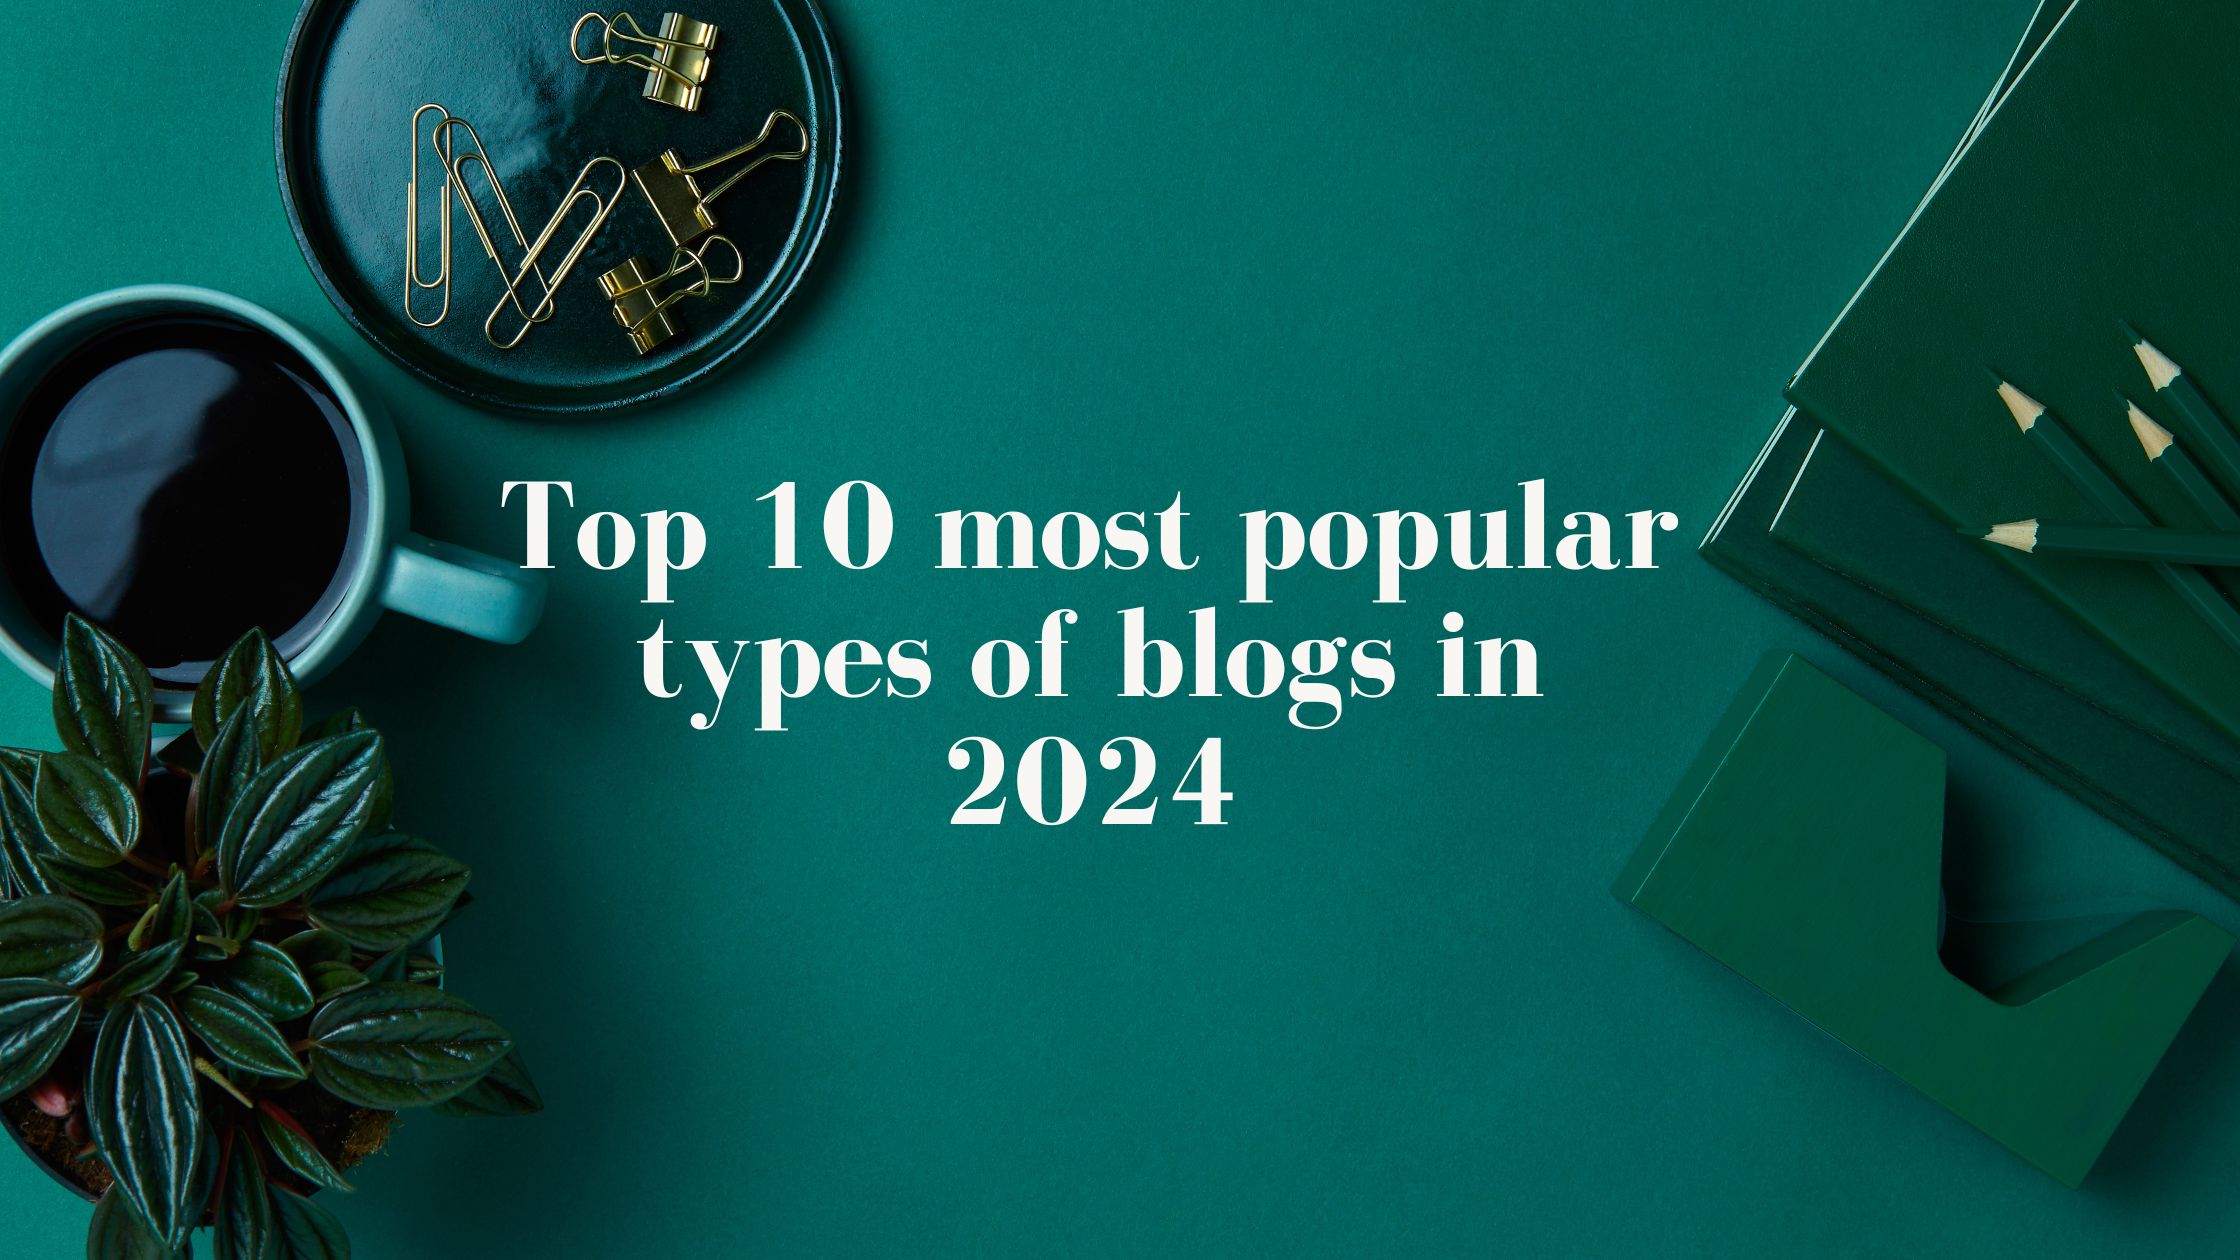 Top 10 most popular types of blogs in 2024